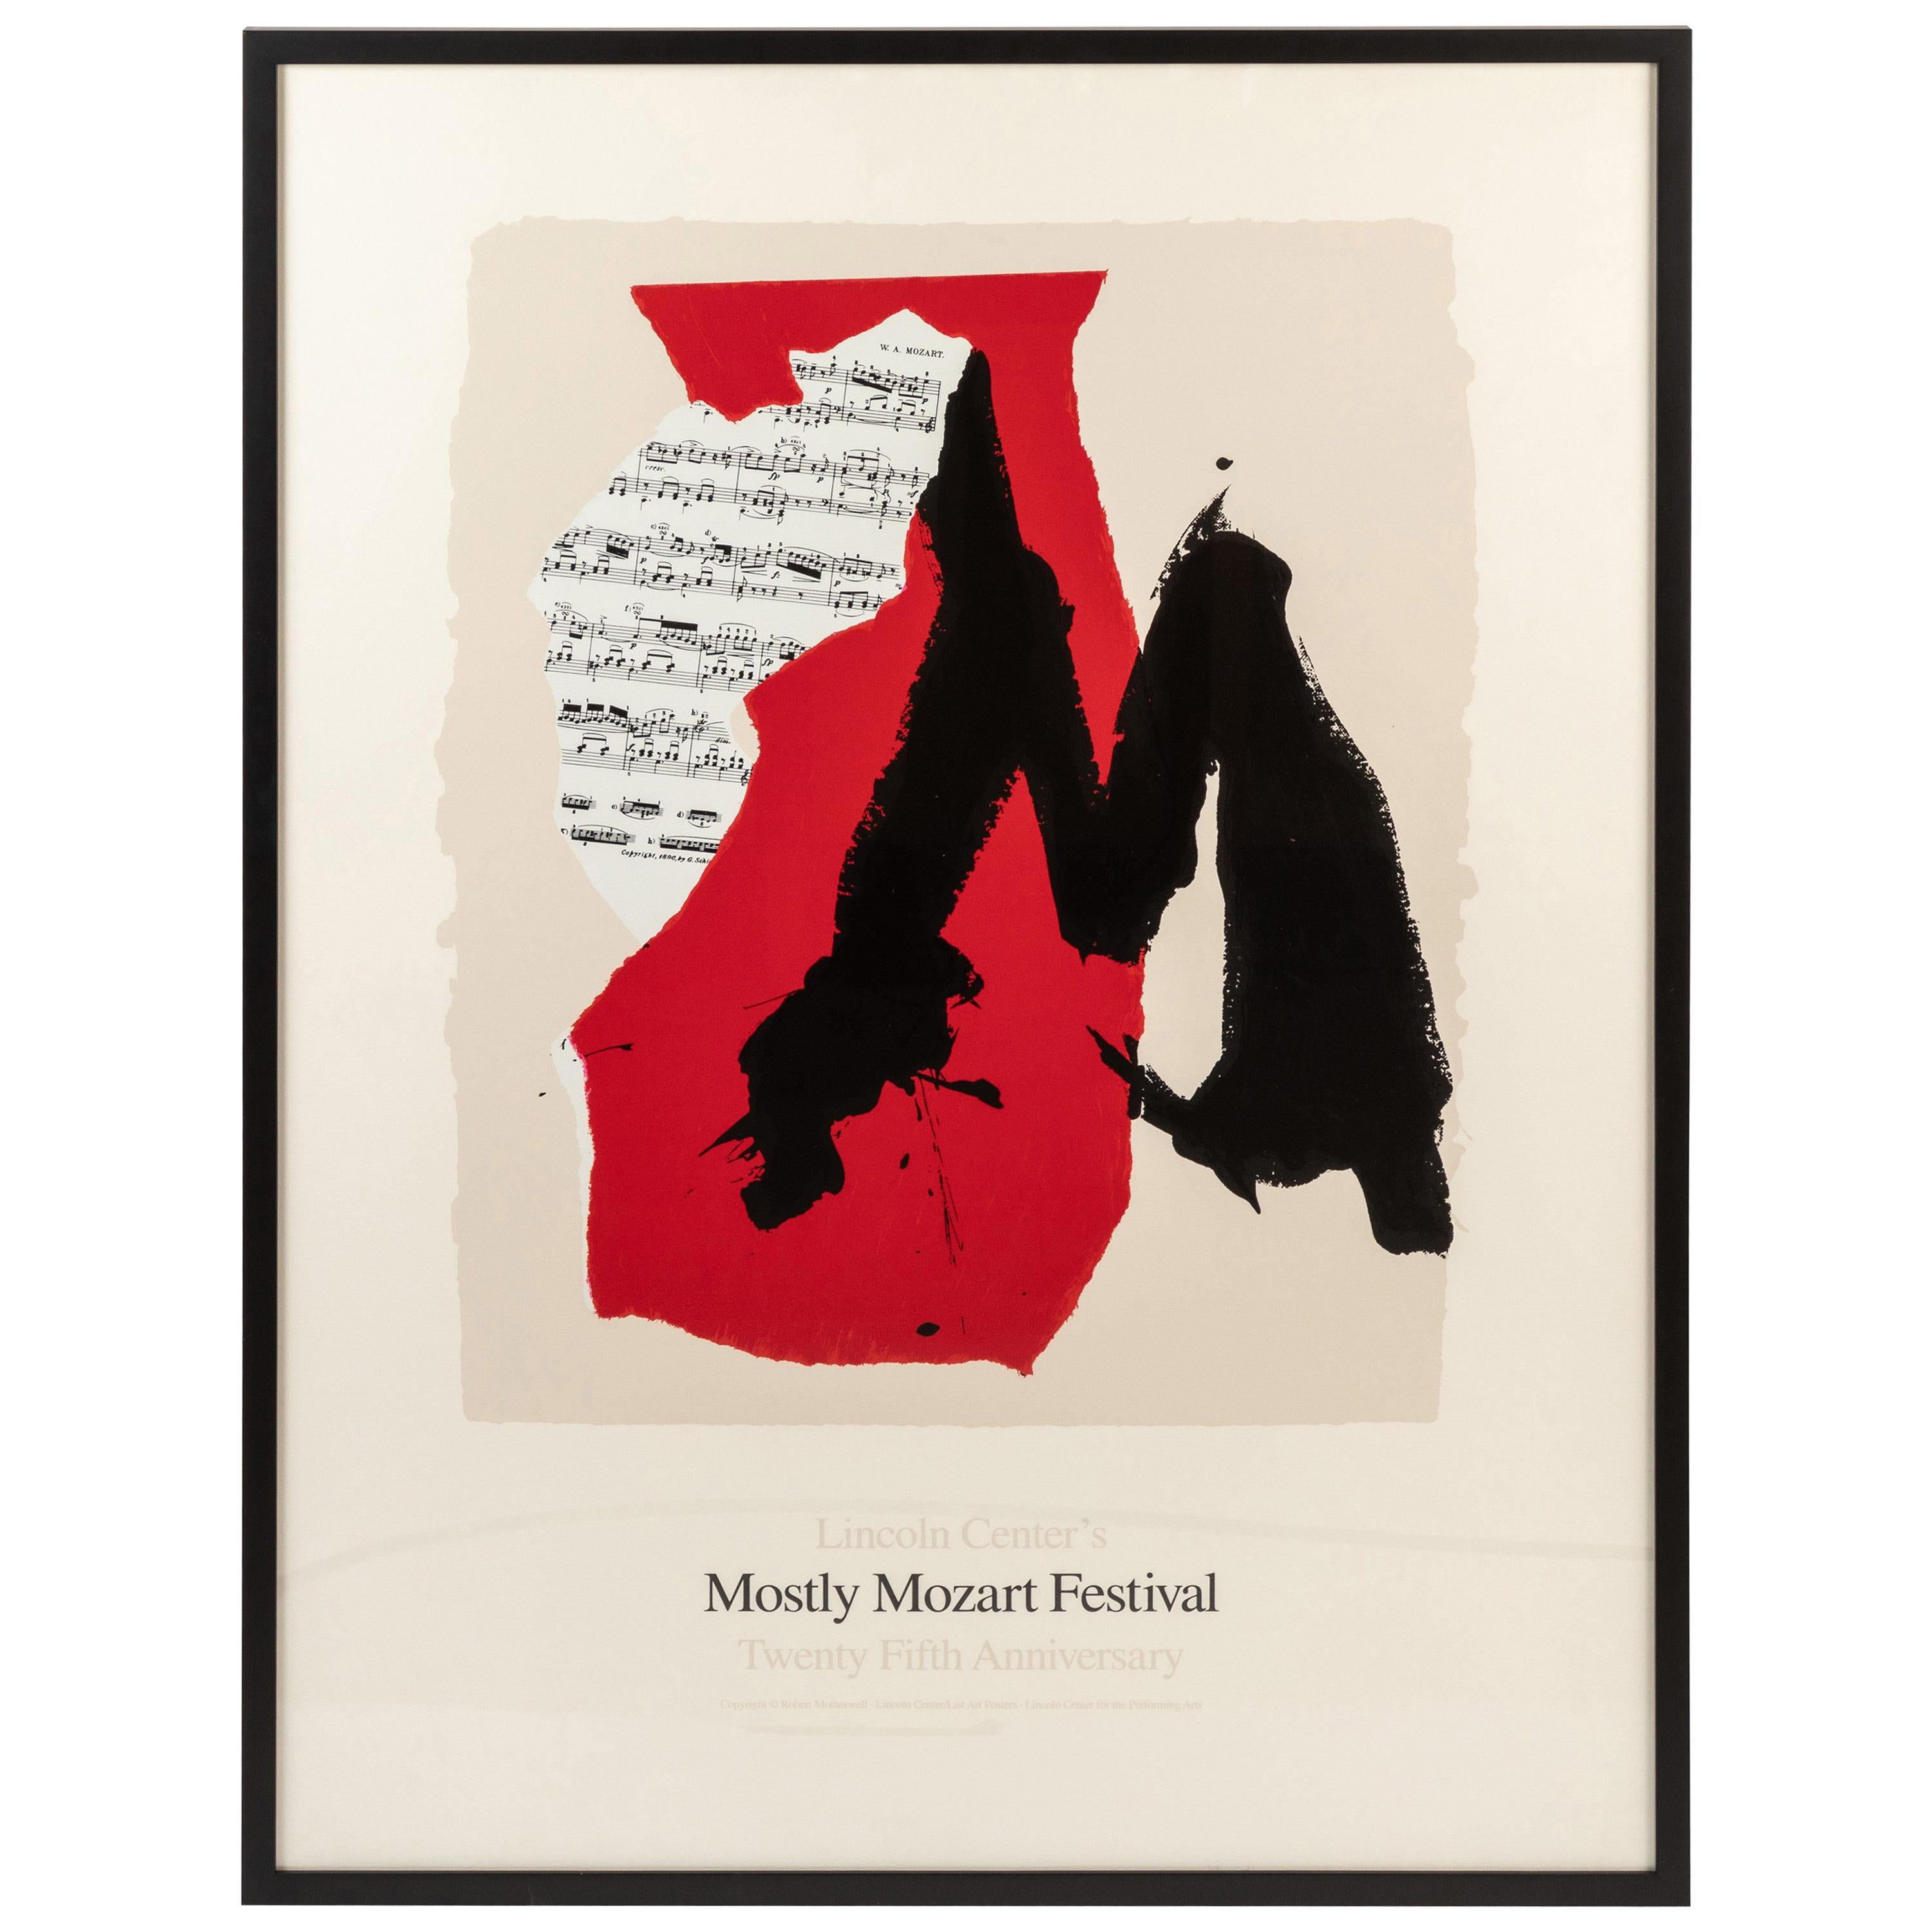 Framed Lincoln Center Mostly Mozart 25th Anniversary Poster by Robert Motherwell